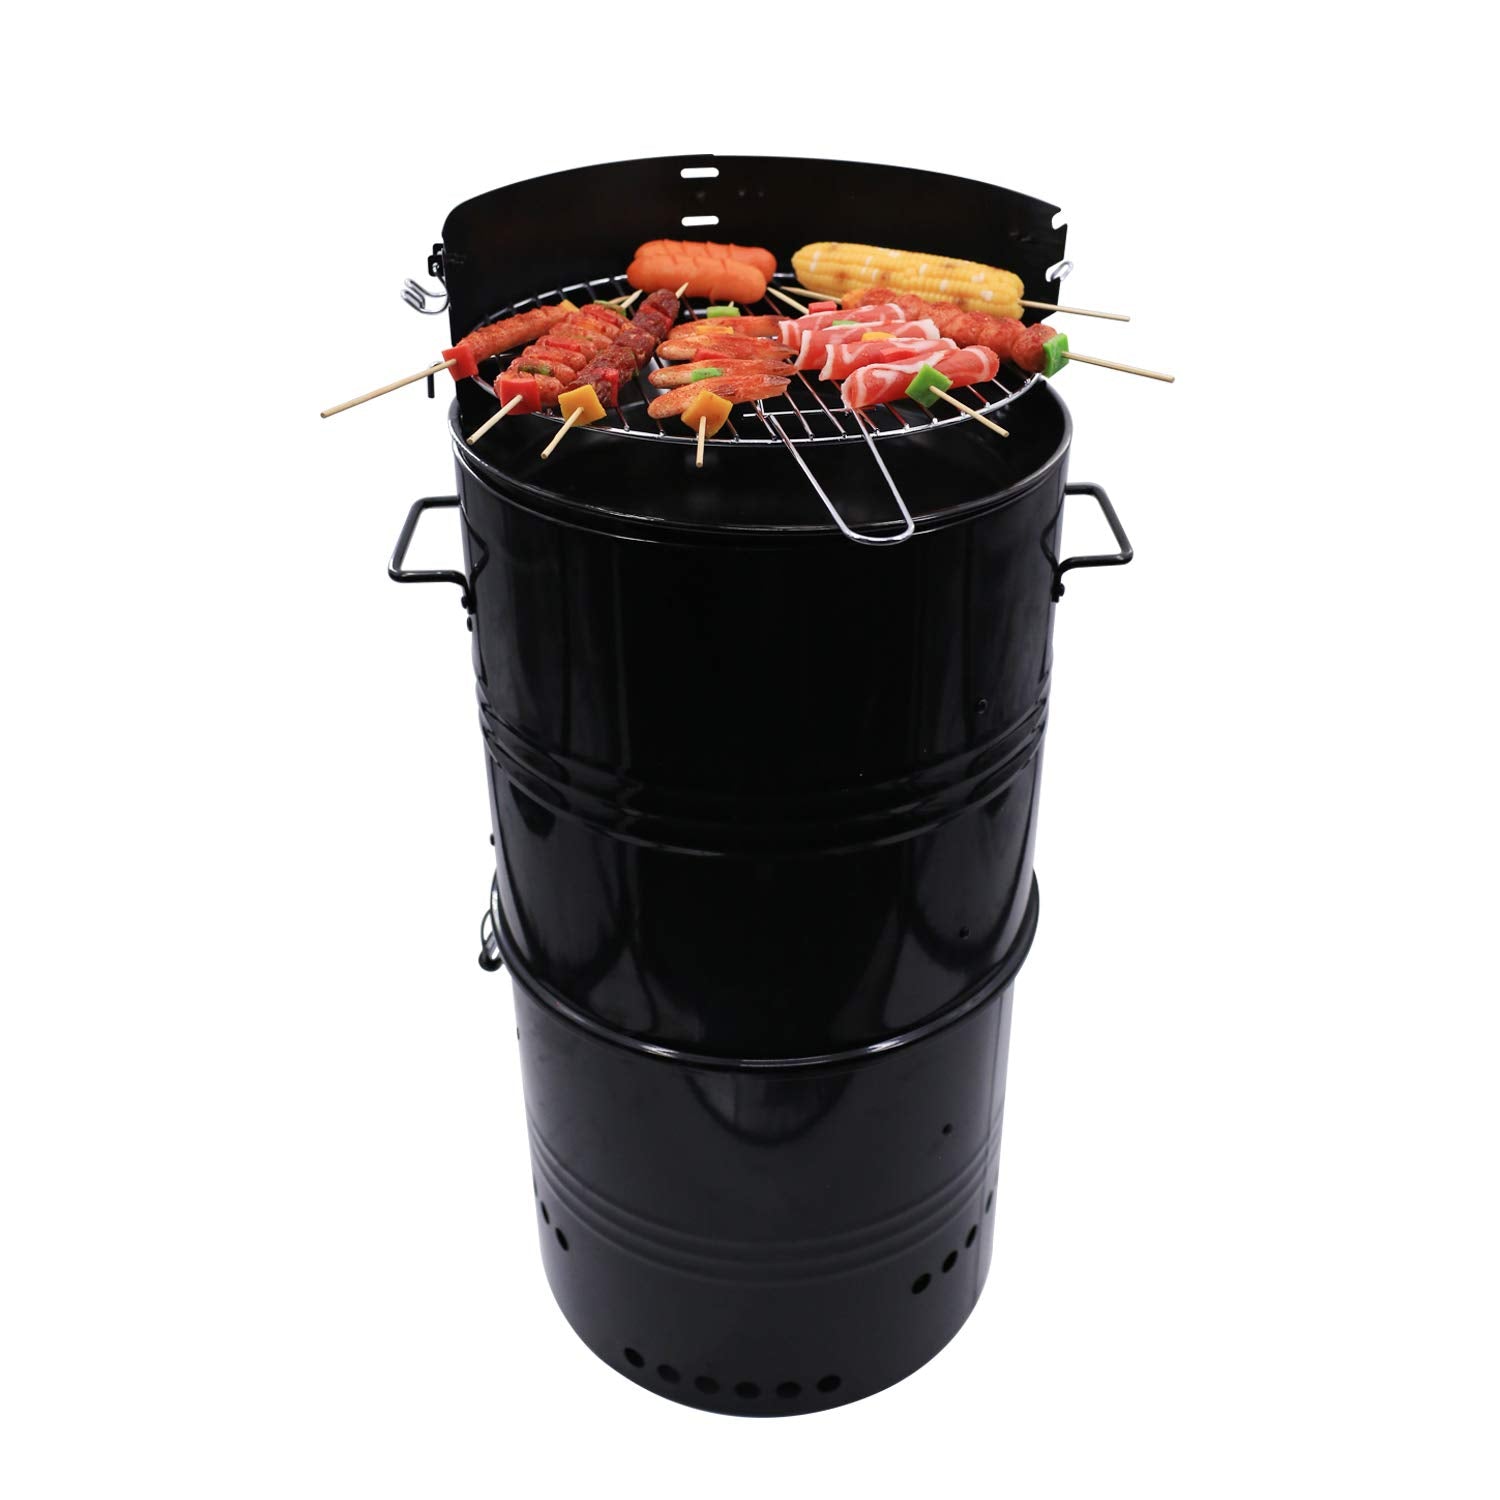 Hakka Vertical Charcoal Smoker, Multi-Function 18 Inch Barbecue and Charcoal Smoker Grill Heavy Duty Round BBQ Grill for Outdoor Cooking Camping(Official Refurbishment)